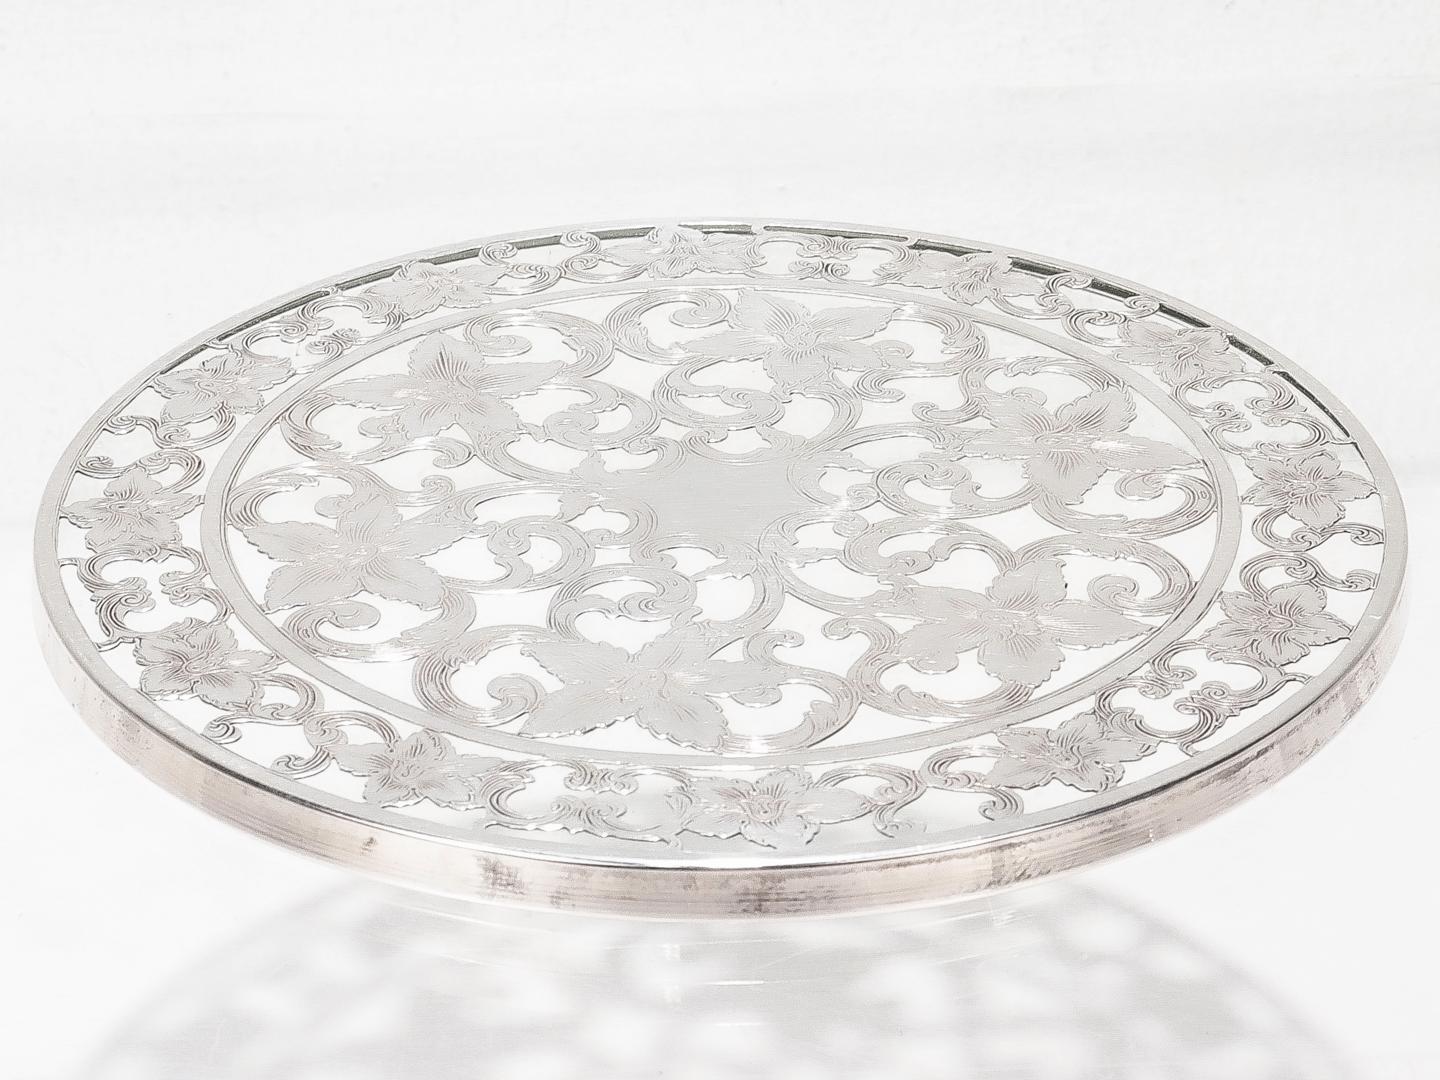 Antique Edwardian Silver Overlay & Glass Floral Wine Coaster or Table Trivet For Sale 2